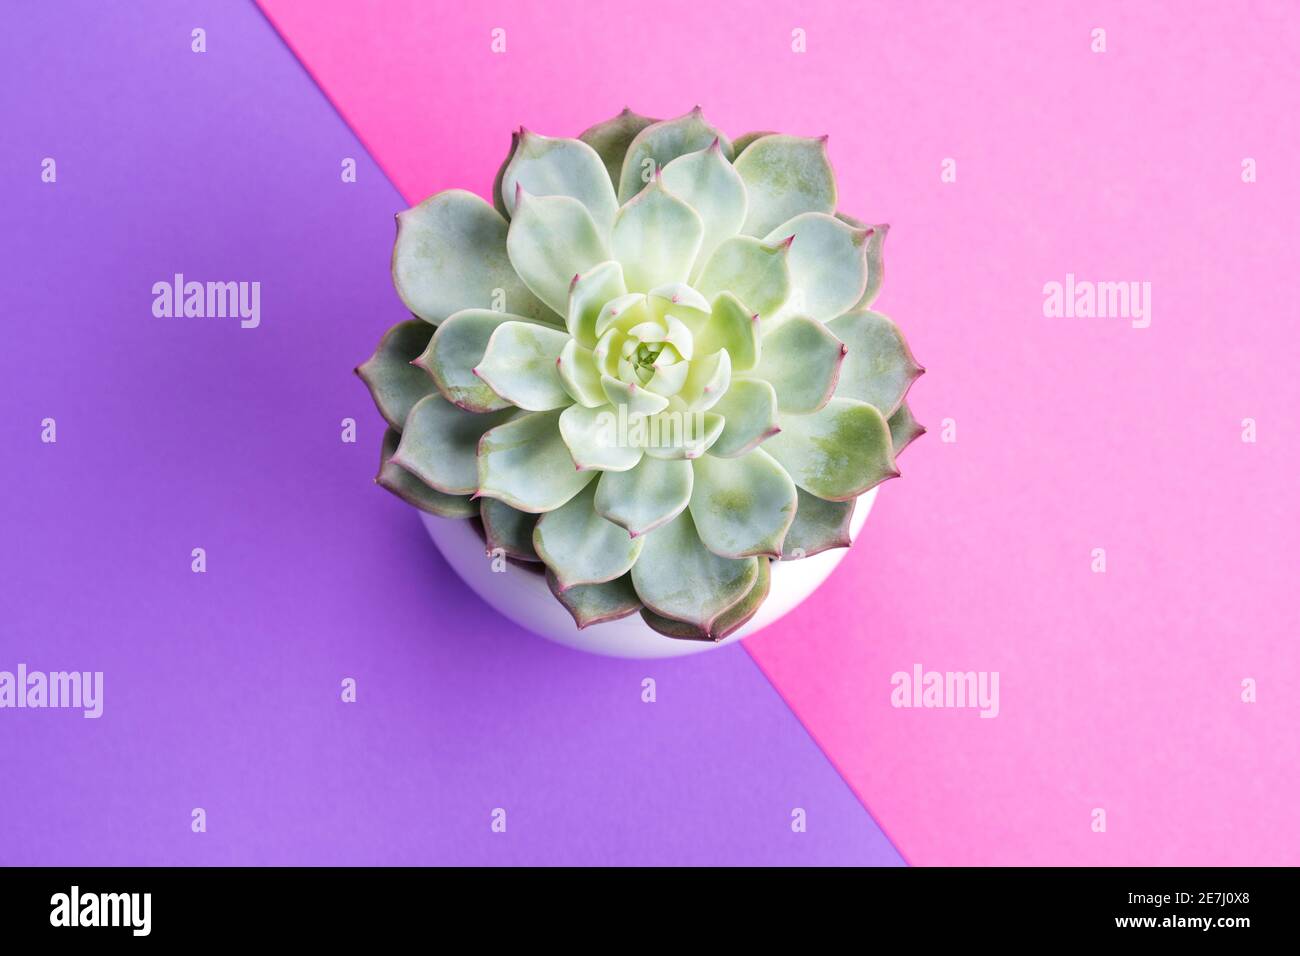 Succulent plant on split purple and pink background Stock Photo - Alamy